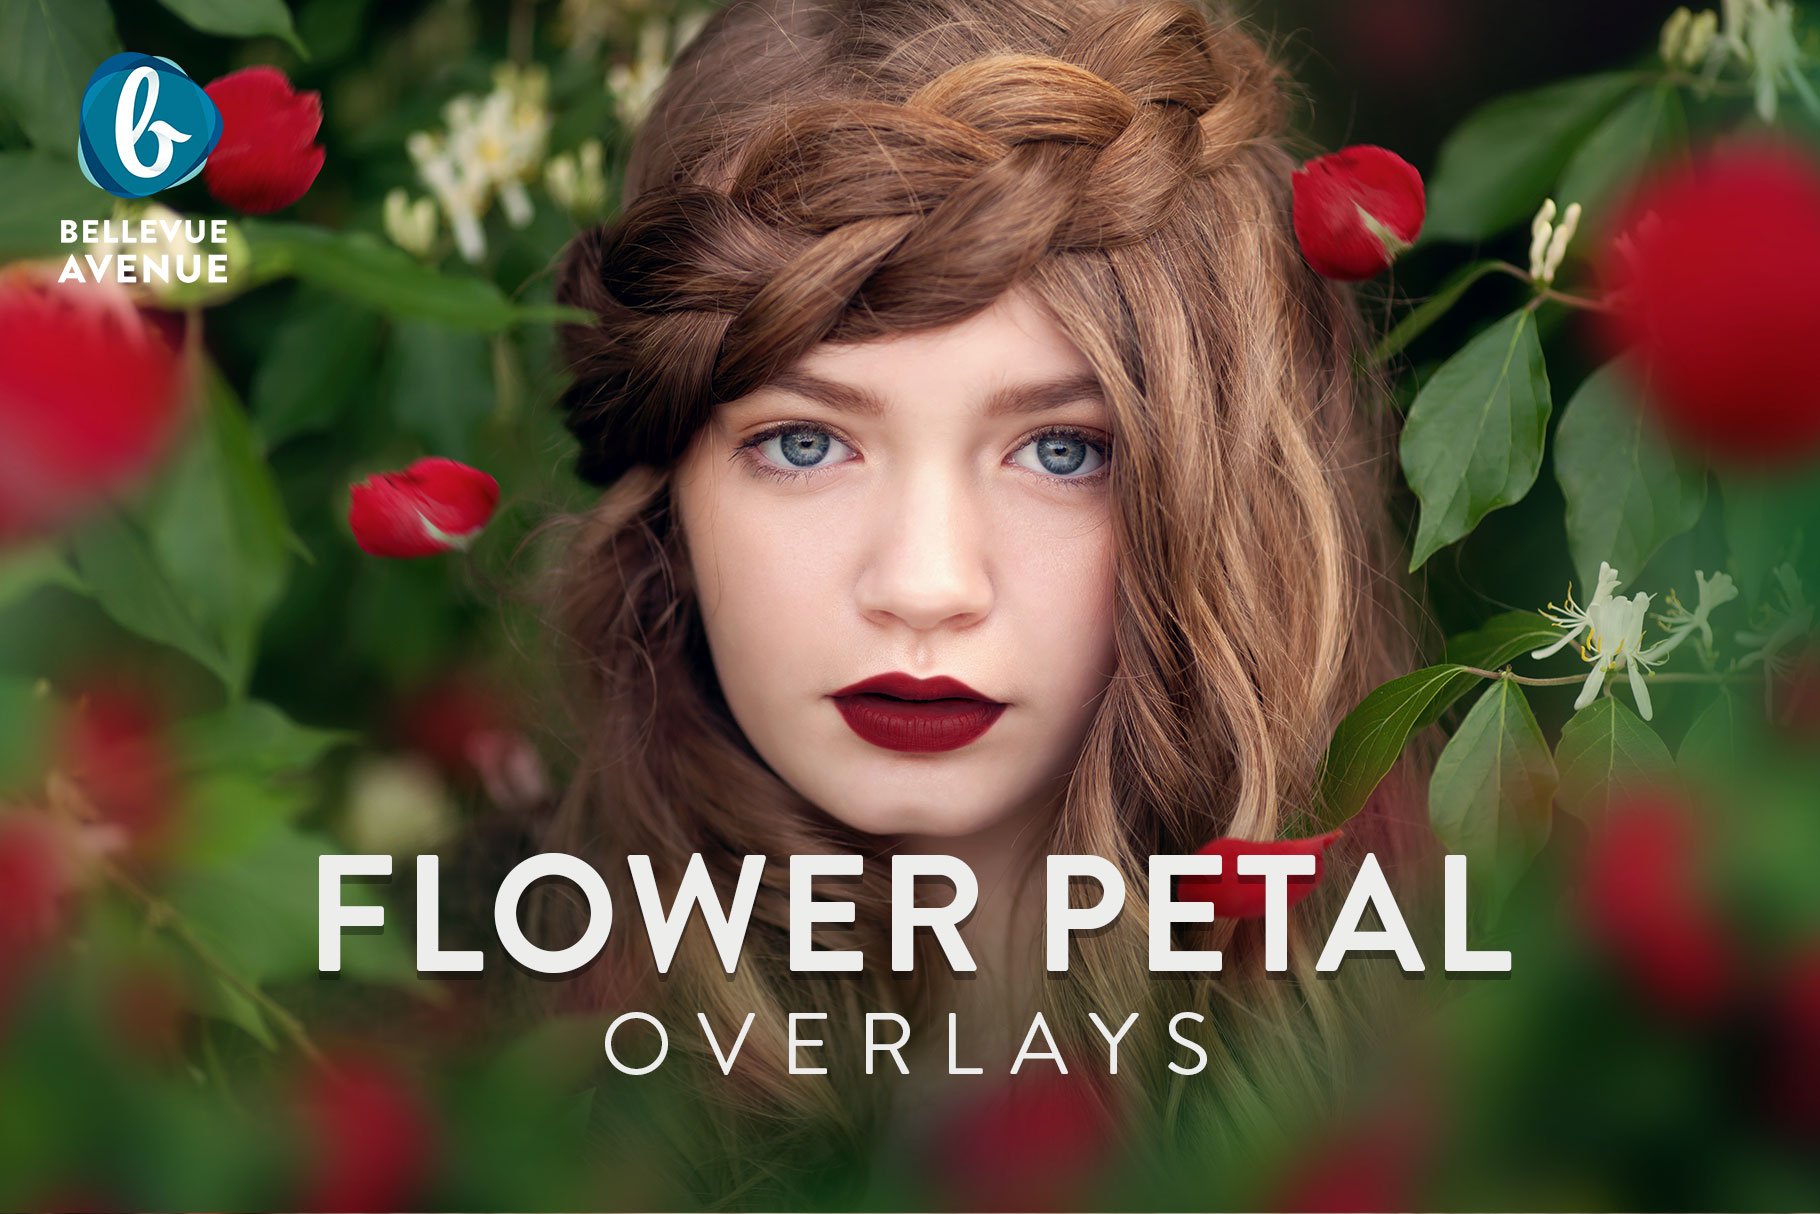 Flower Petal Overlays (Real)cover image.